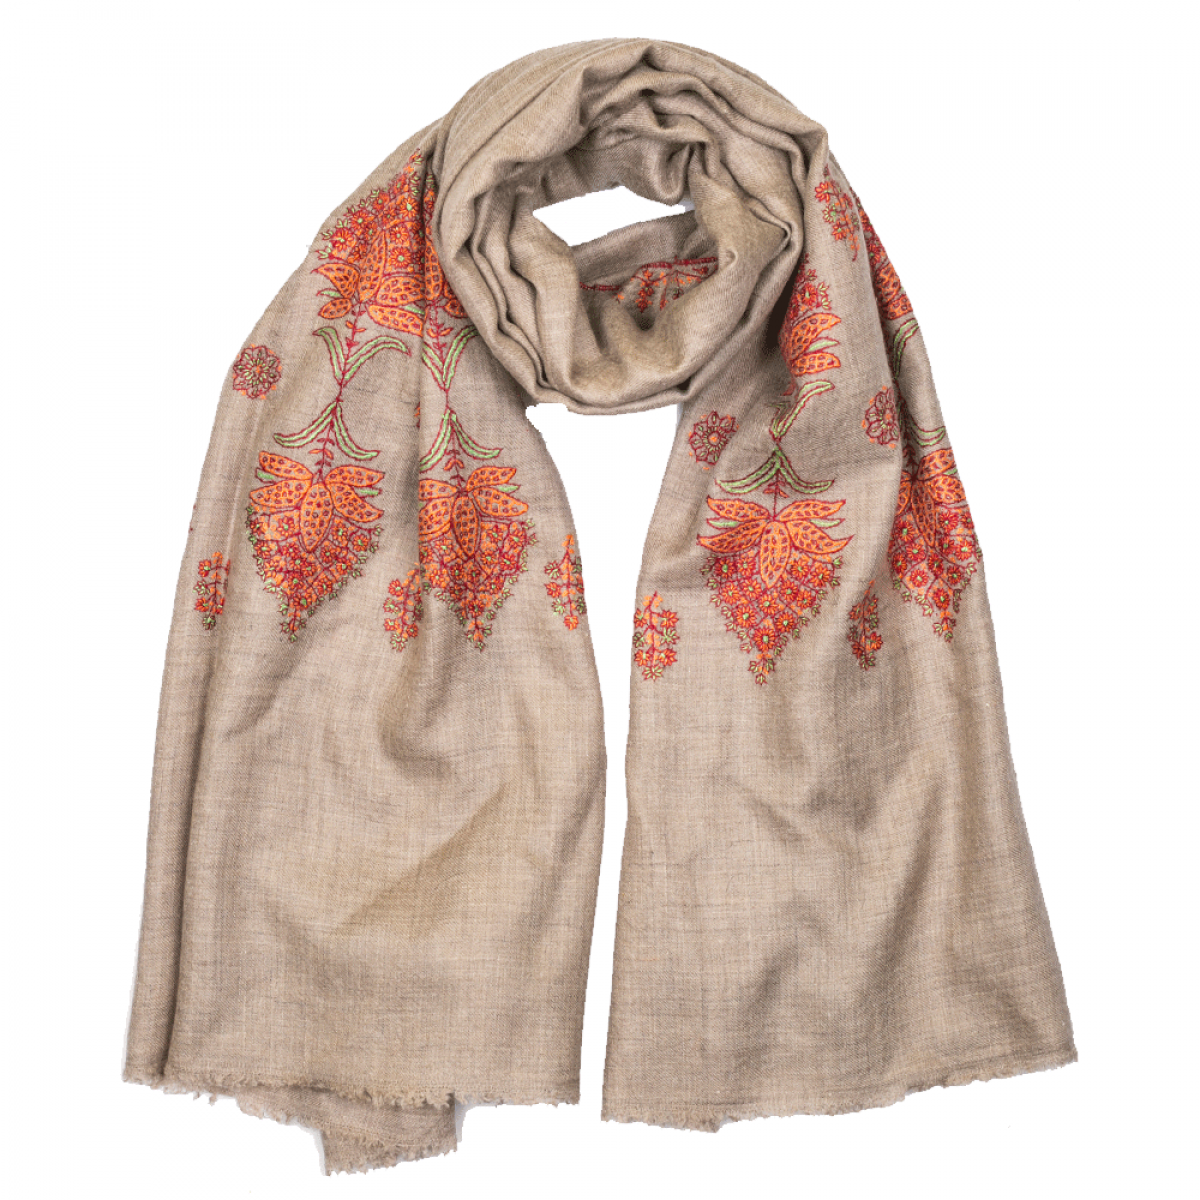 Embroidered Pashmina Stole - Natural & Red